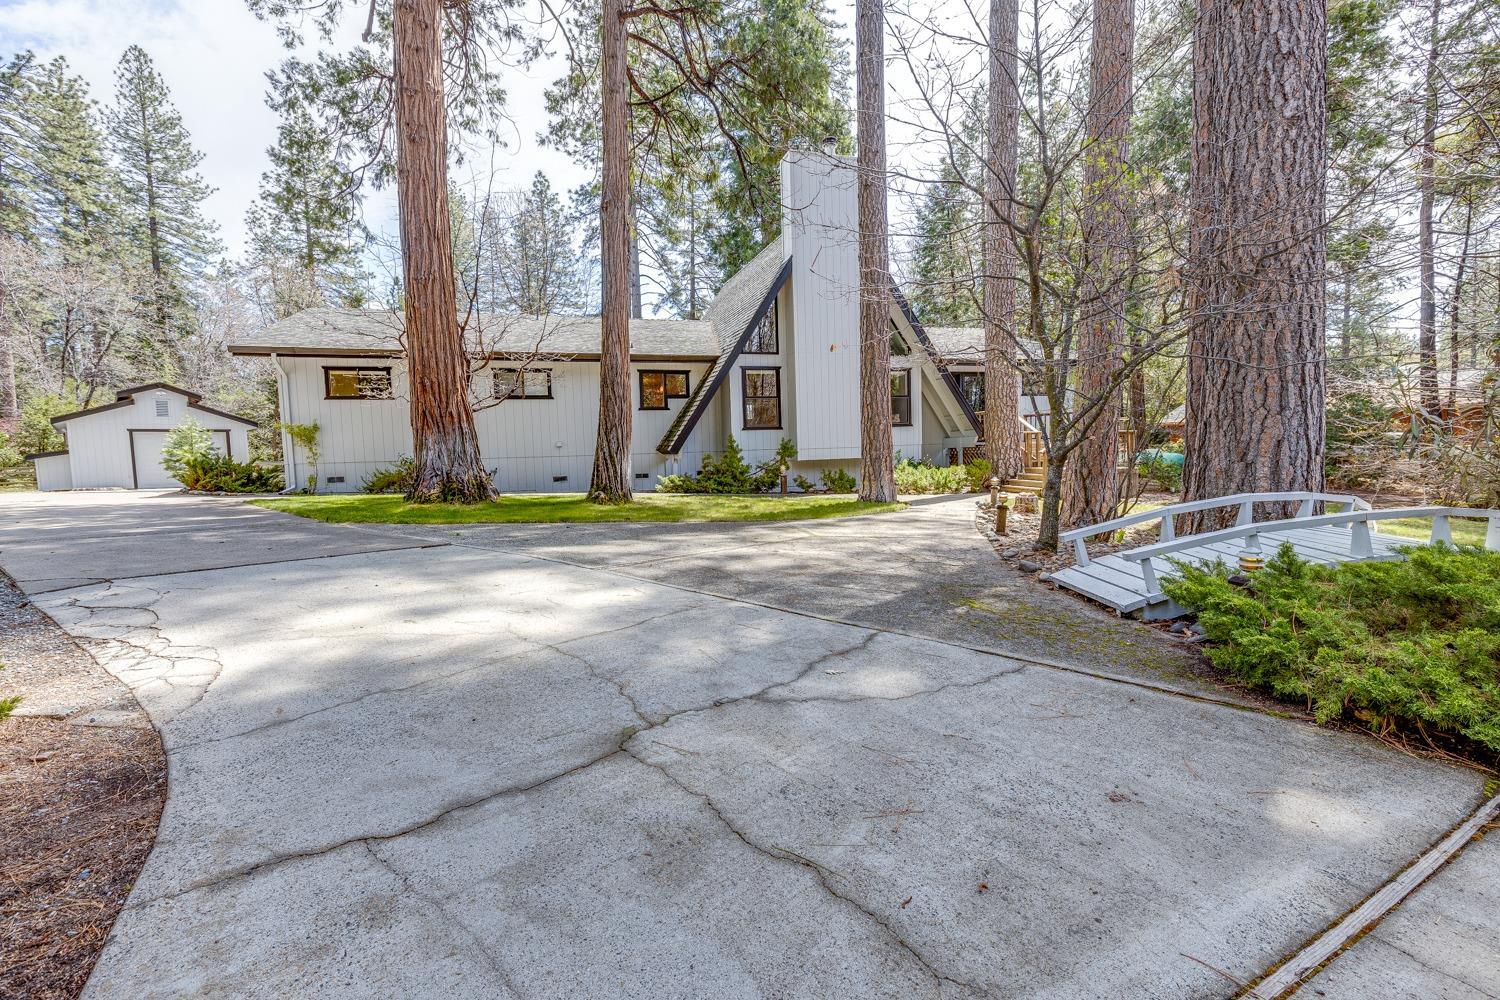 Photo of 5575 Silver Saddle Ct in Hathaway Pines, CA